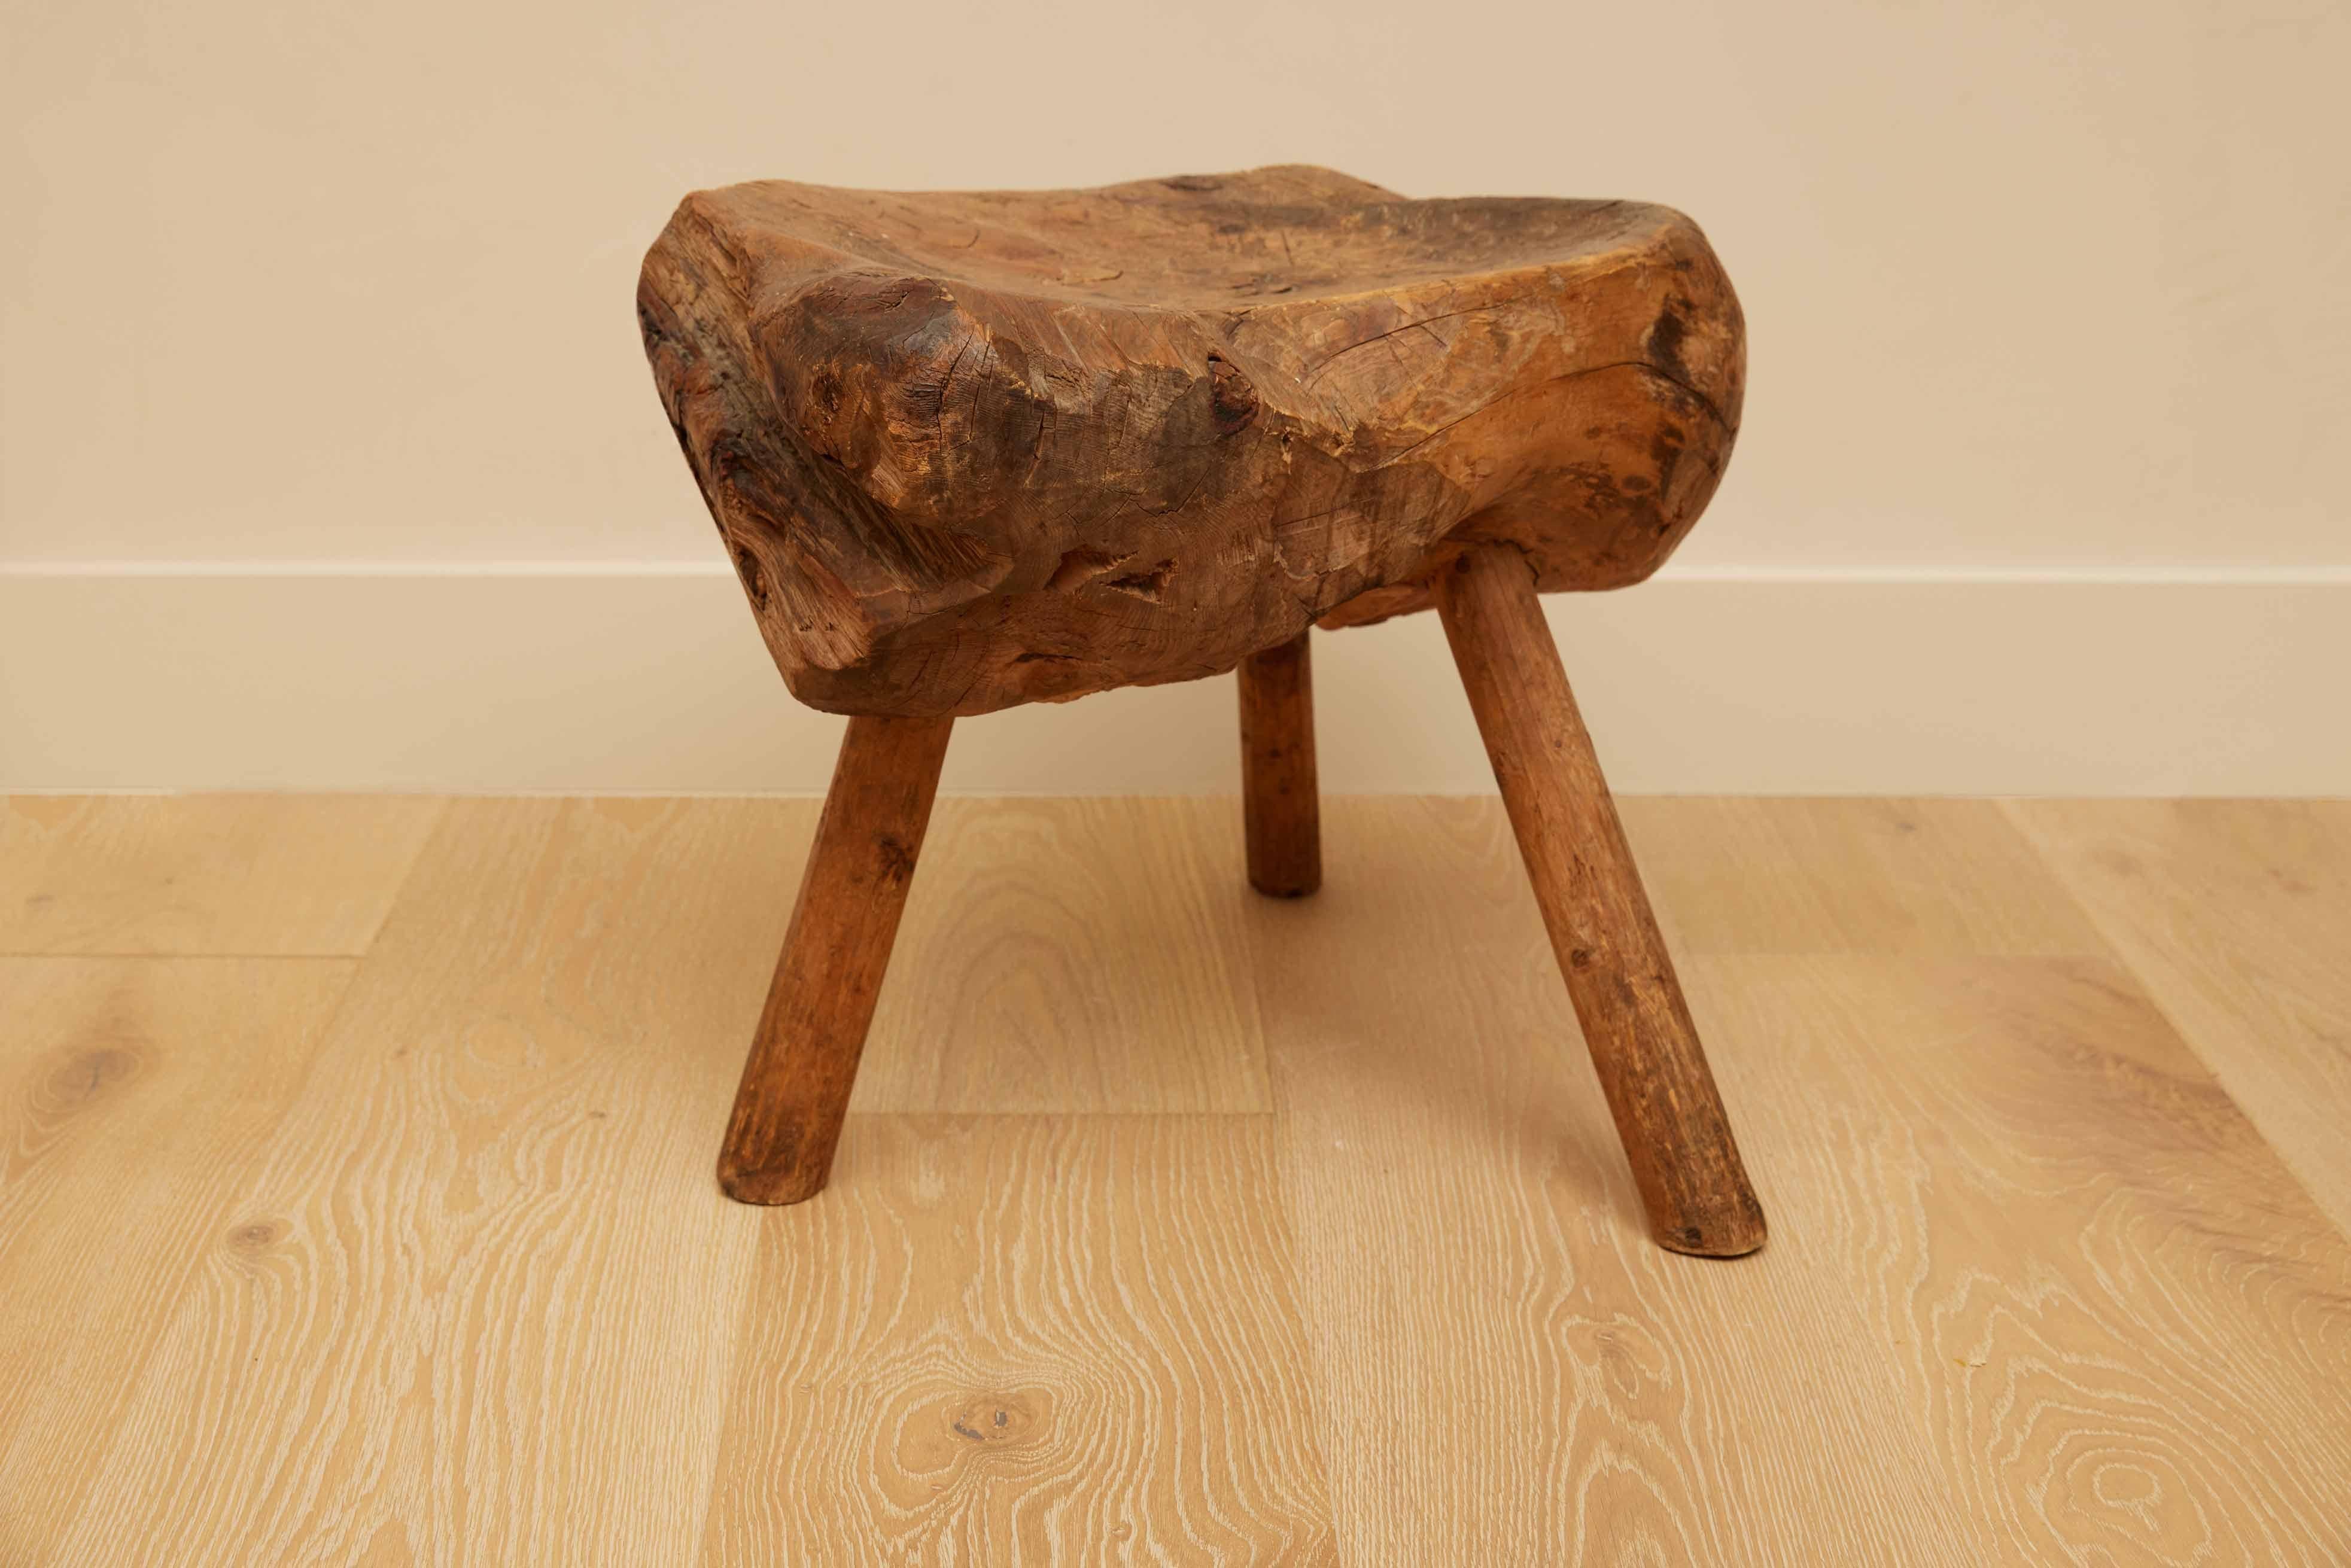 Wood Block Stool from Norway, 18th C For Sale 3